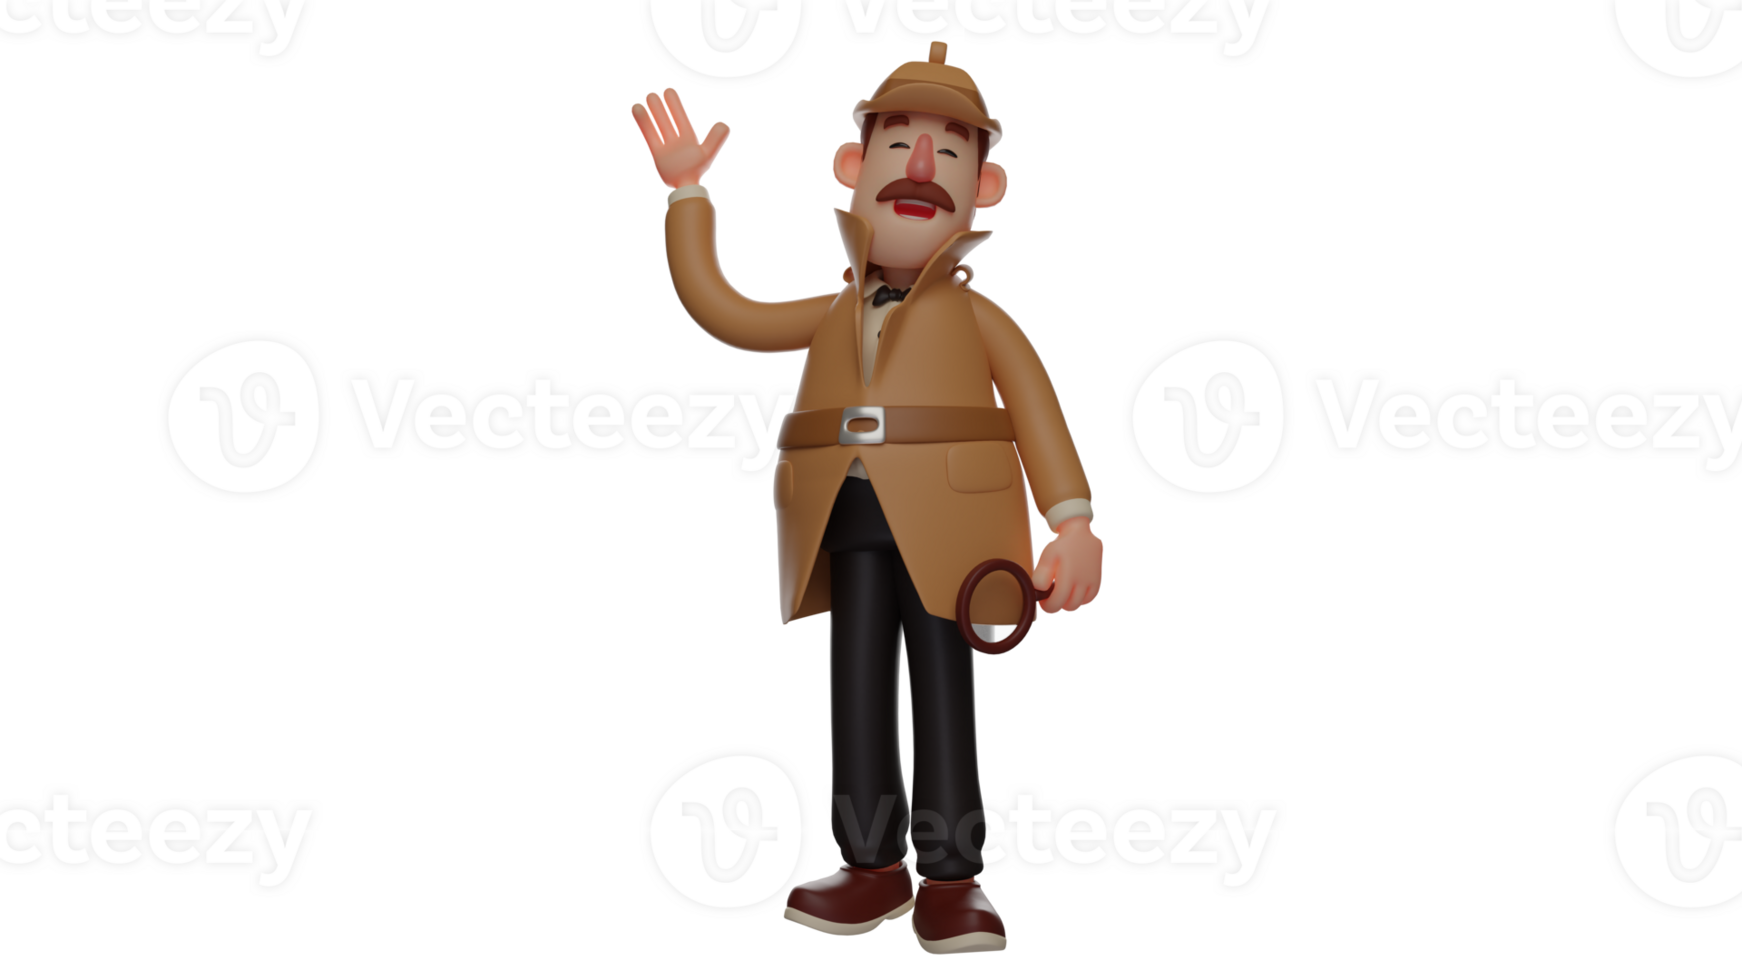 3D illustration. Detective 3D Cartoon Character. The detective stood up and laughed happily. The friendly detective waves his hand to someone he meets on the street. 3D cartoon character png